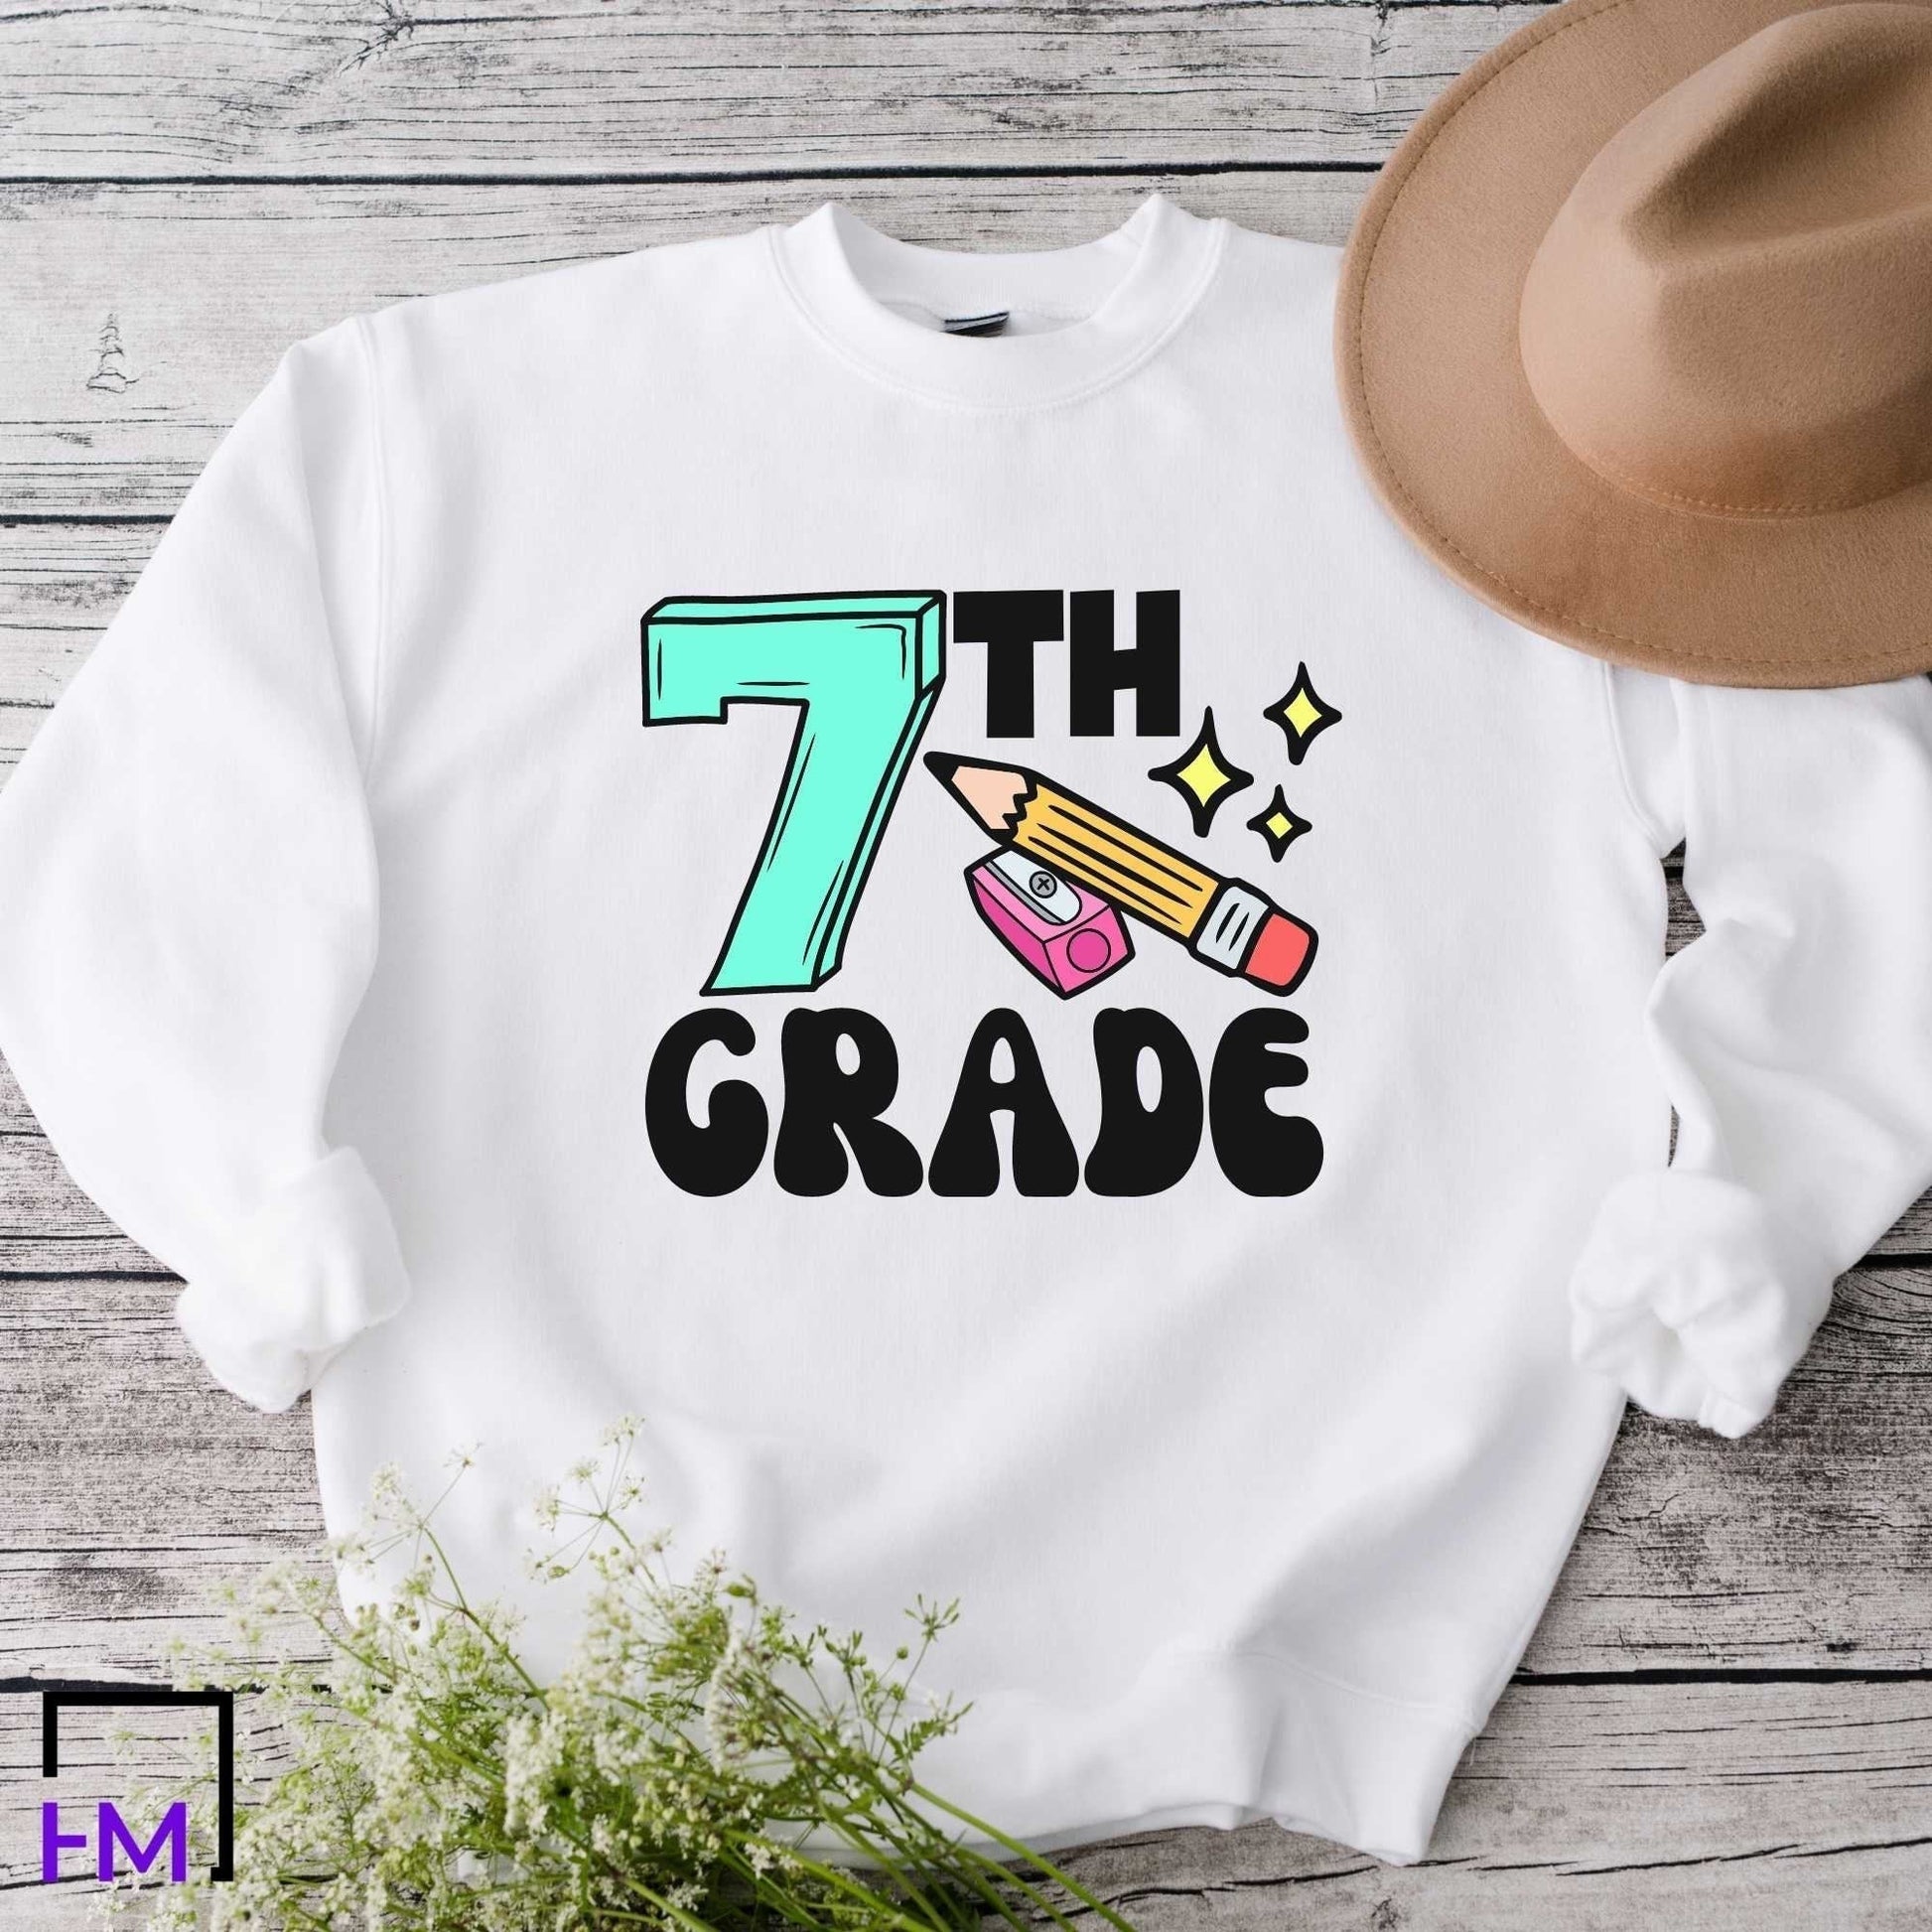 7th Grade Teacher Sweater | Great for New Middle School Team, Appreciation Gifts, 100th Day, Holiday Celebration, Christmas Presents Gift HMDesignStudioUS